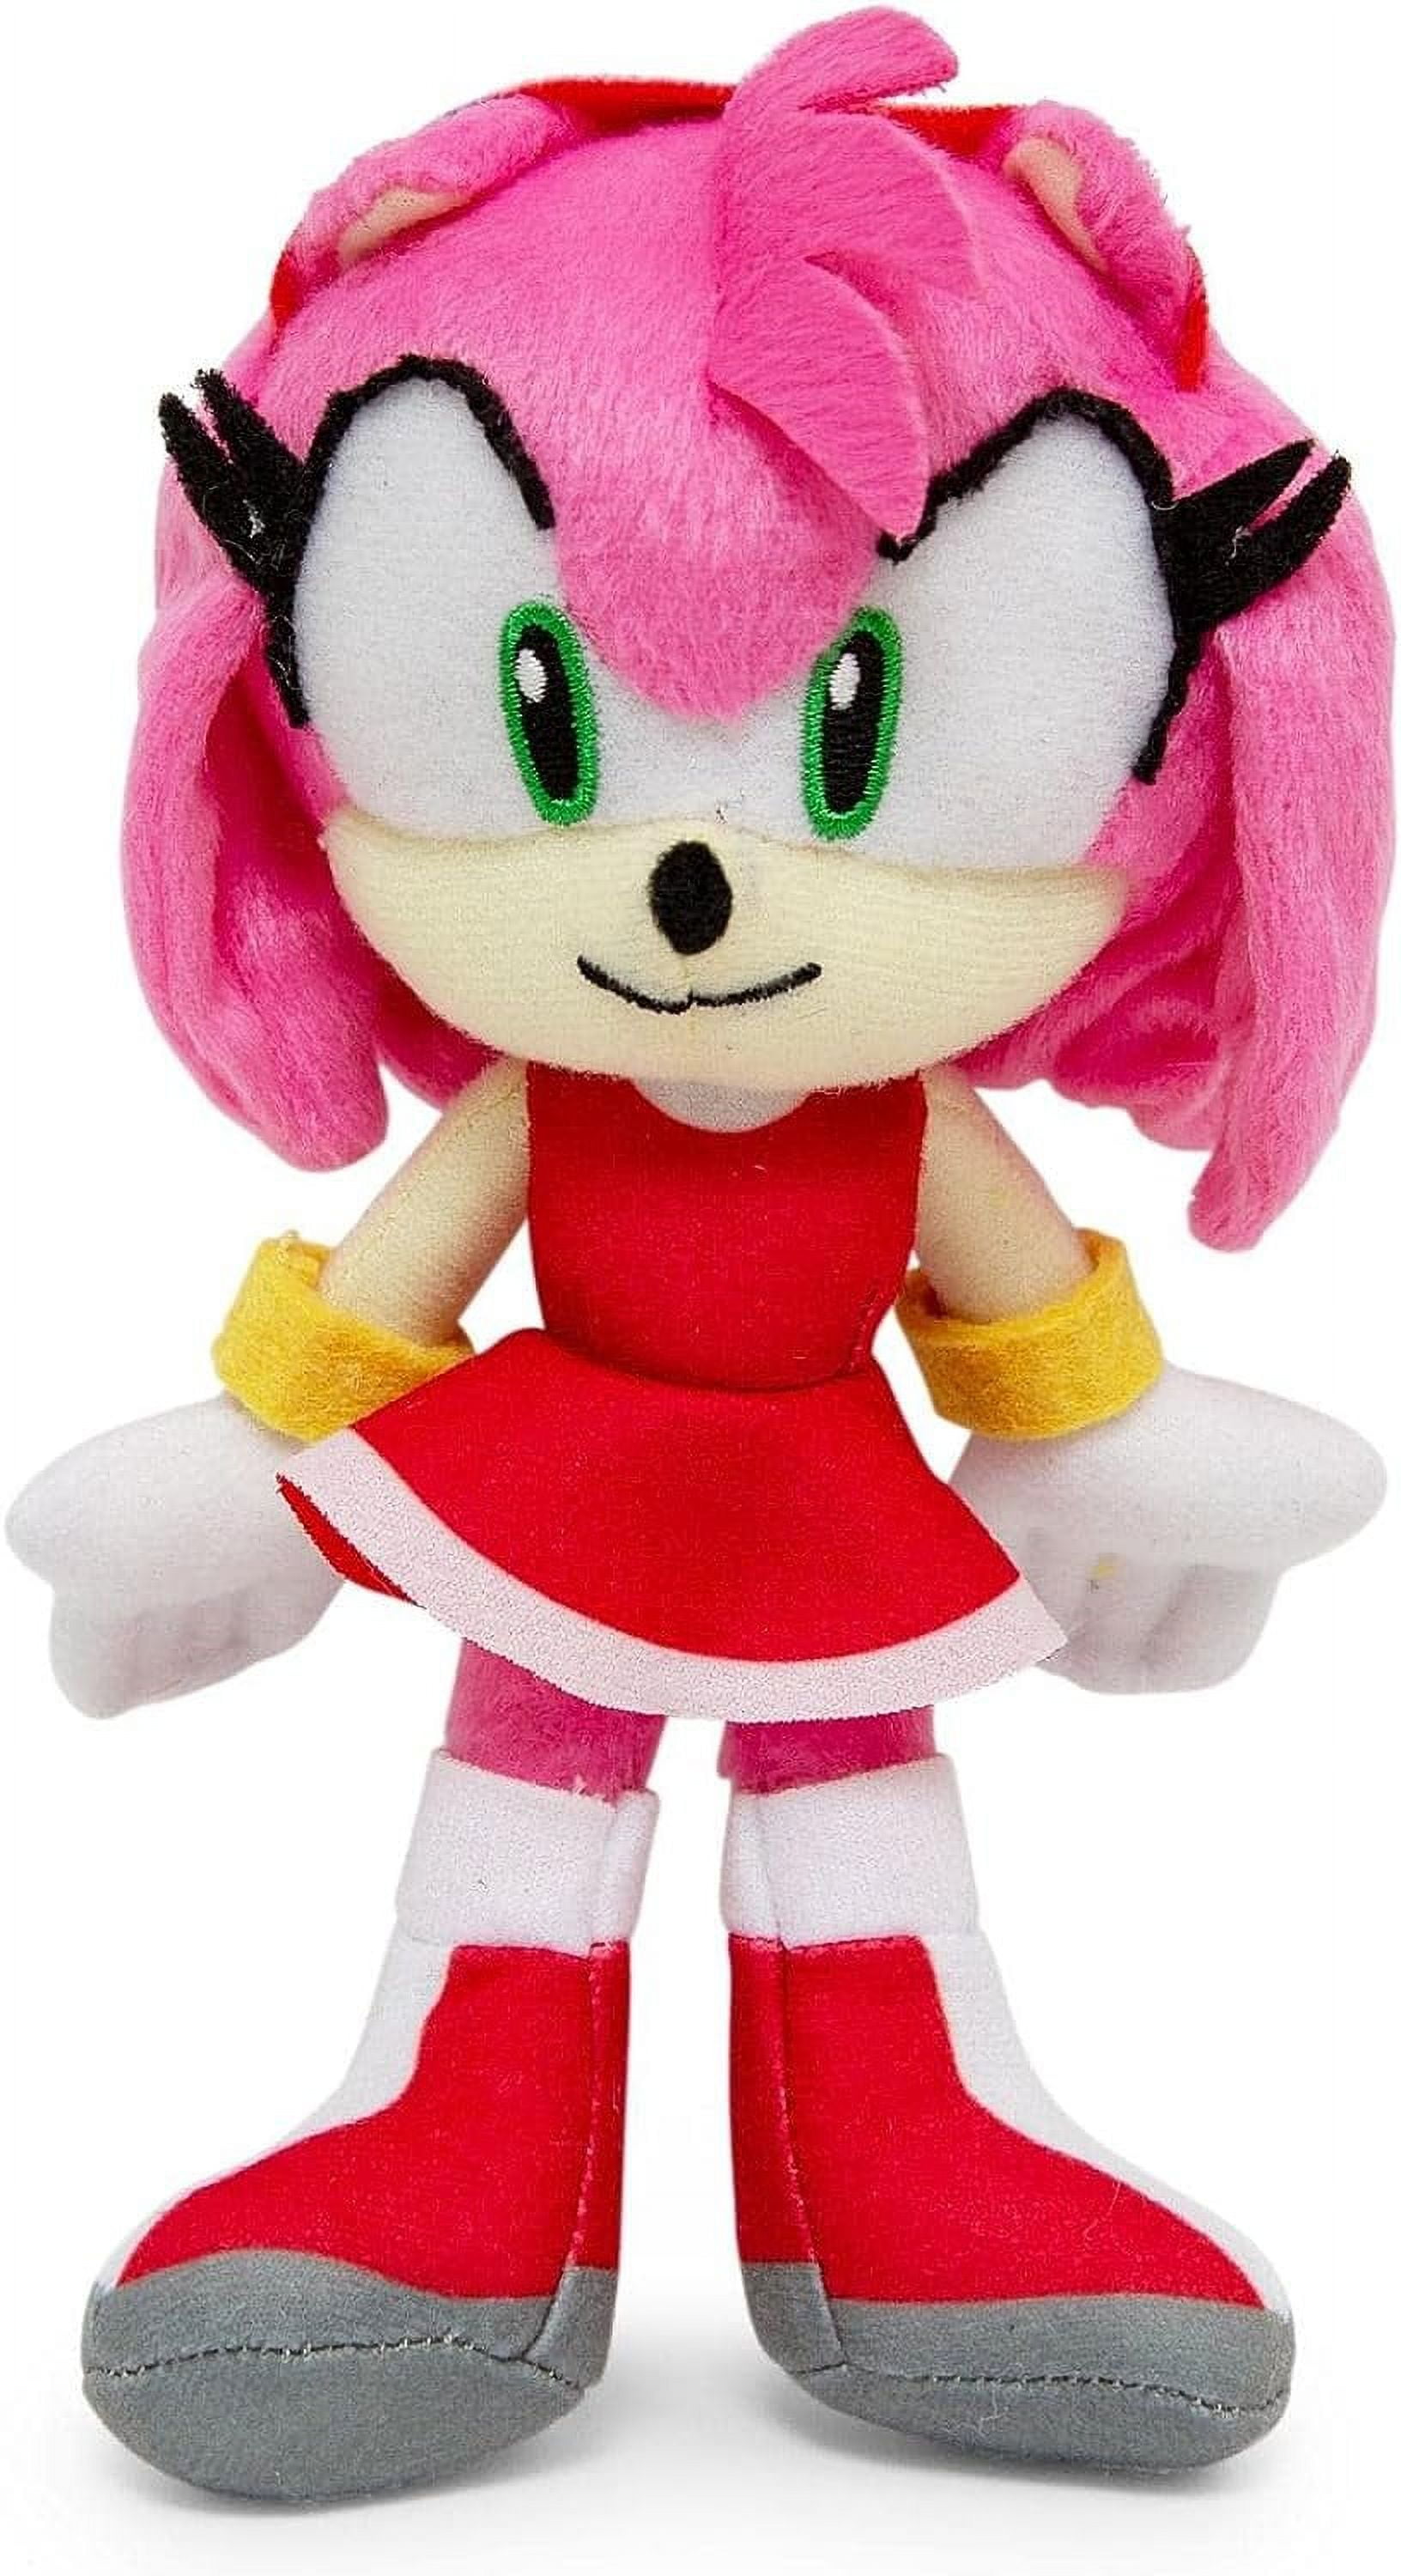 Sonic the Hedgehog 8-Inch Character Plush Toy